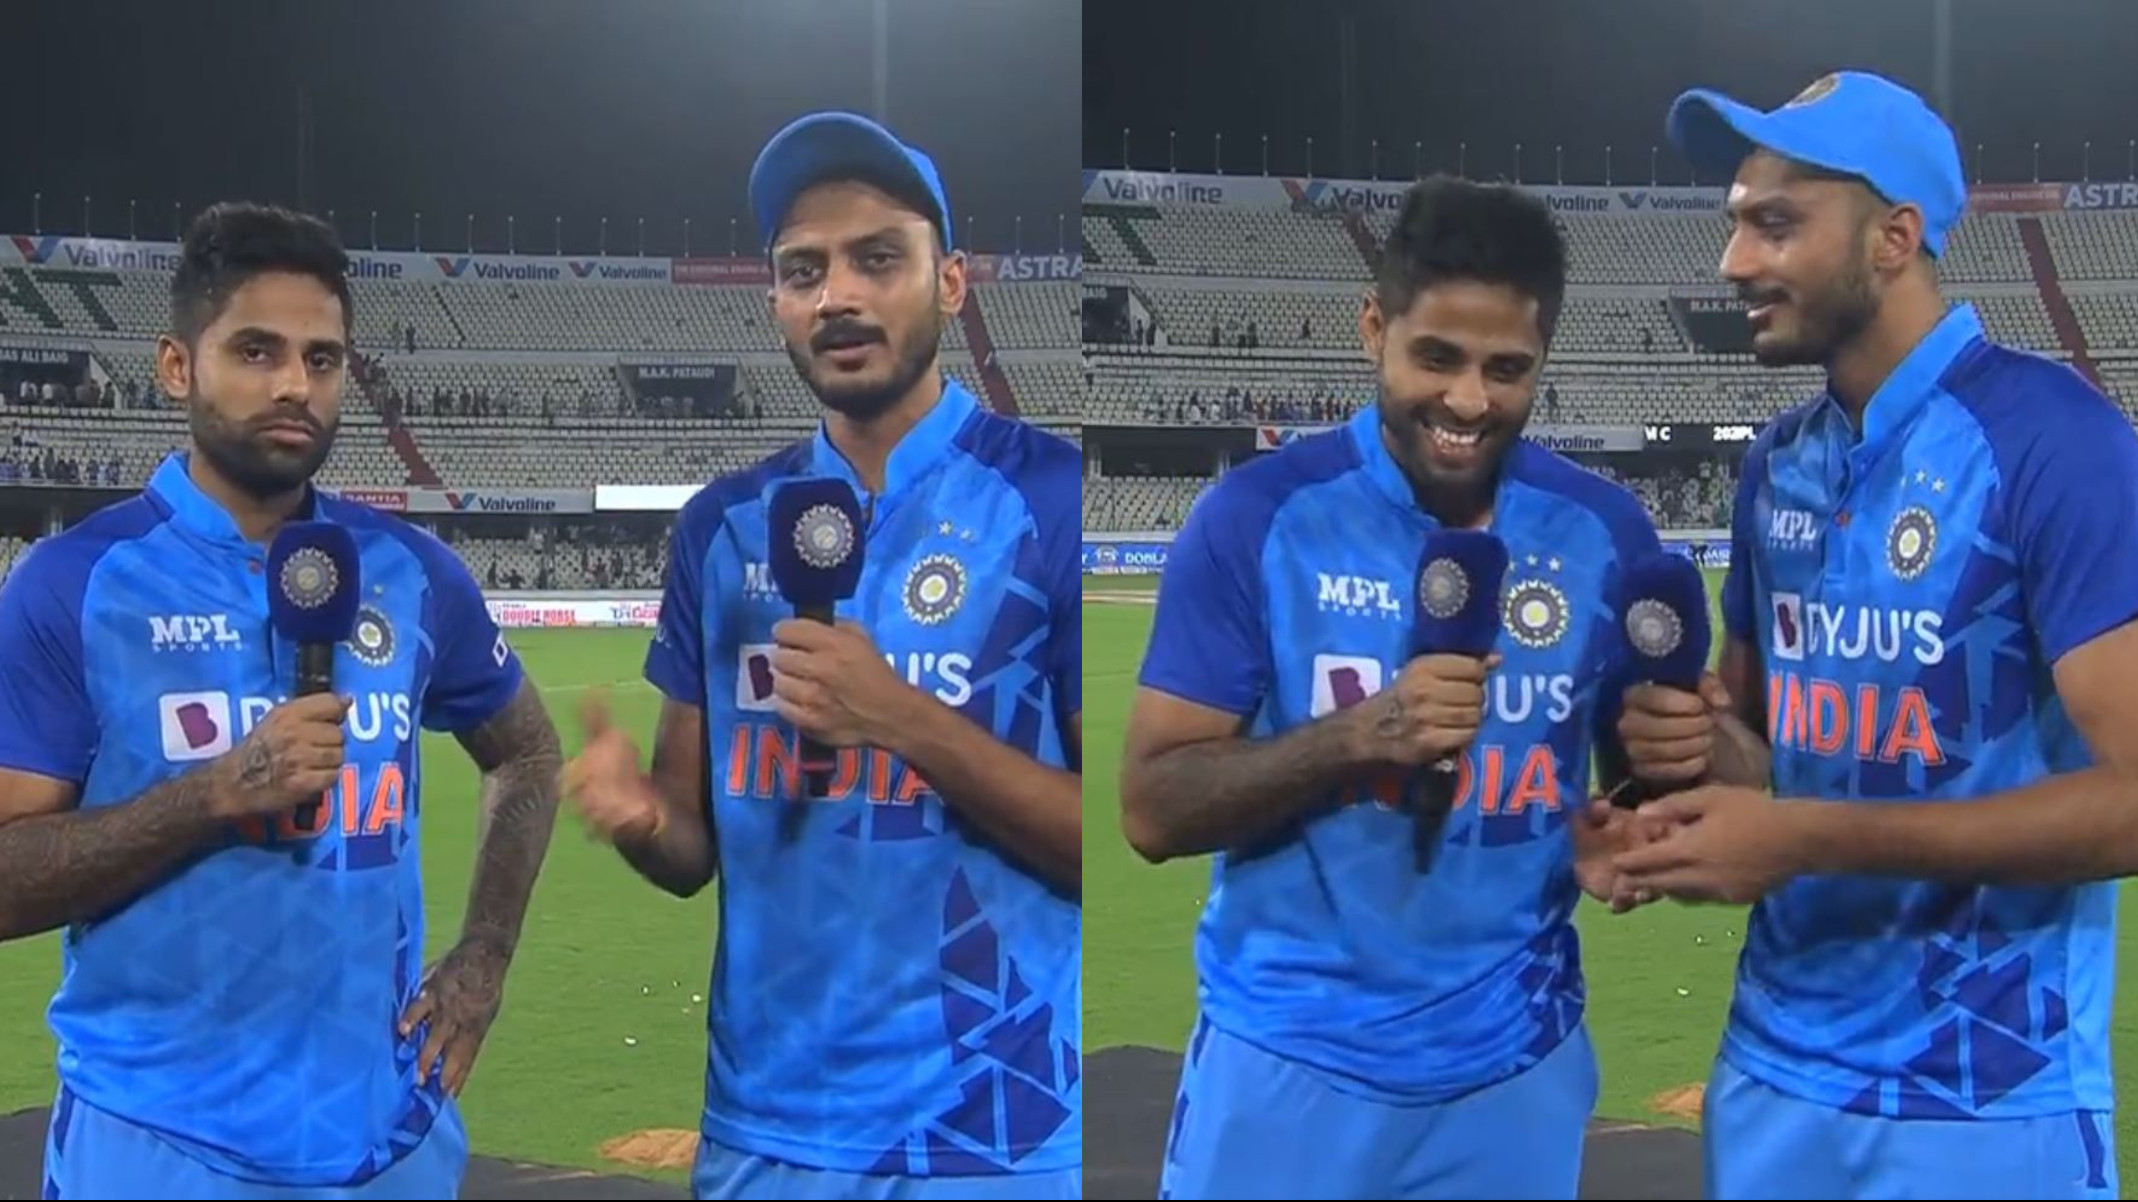 IND v AUS 2022: WATCH- Suryakumar Yadav and Akshar Patel reveal they were unwell before the 3rd T20I